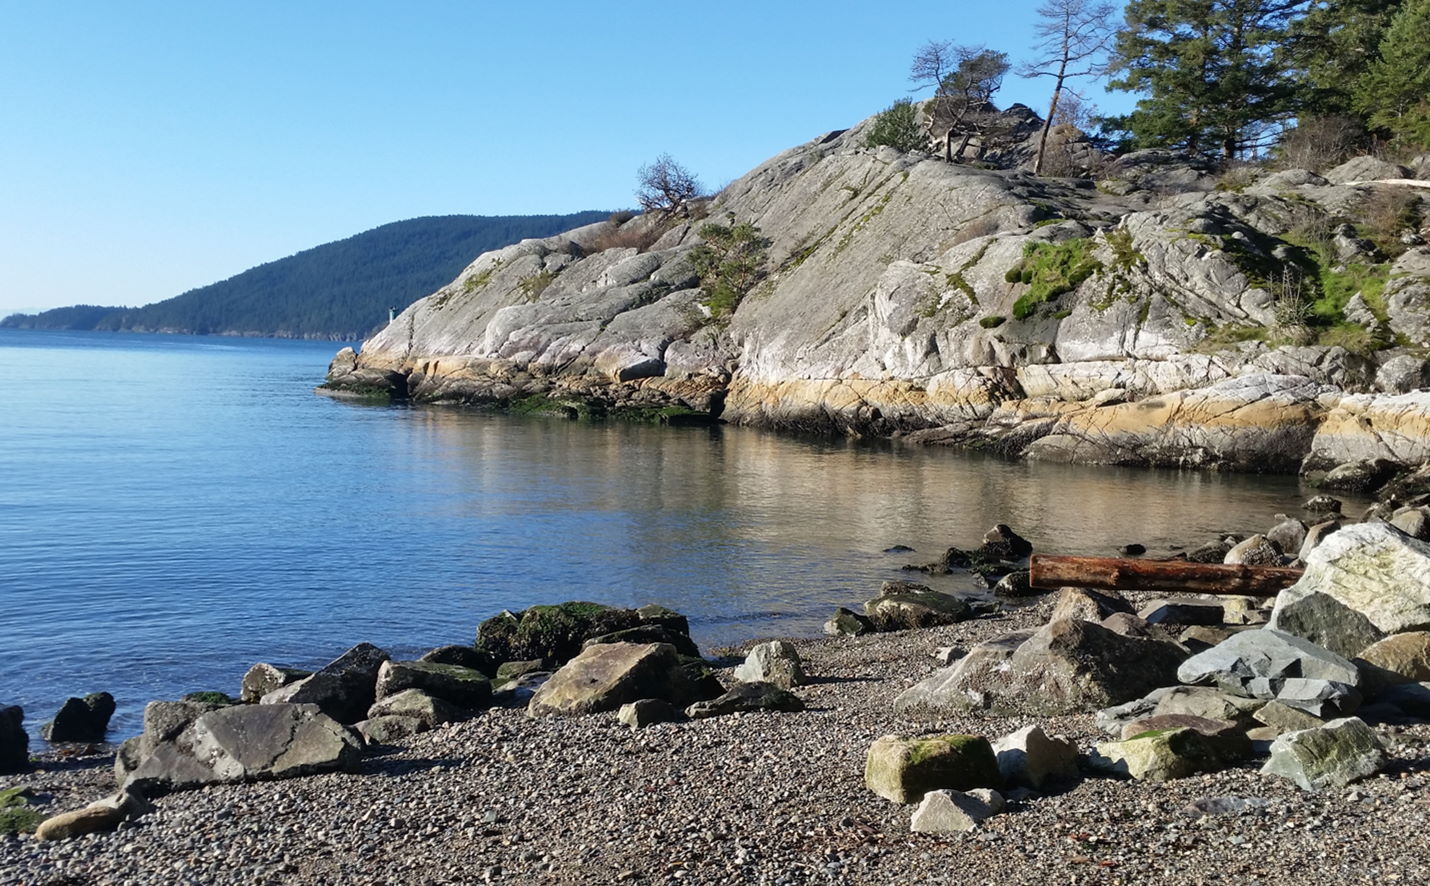 Whytecliff Park beach and rocks